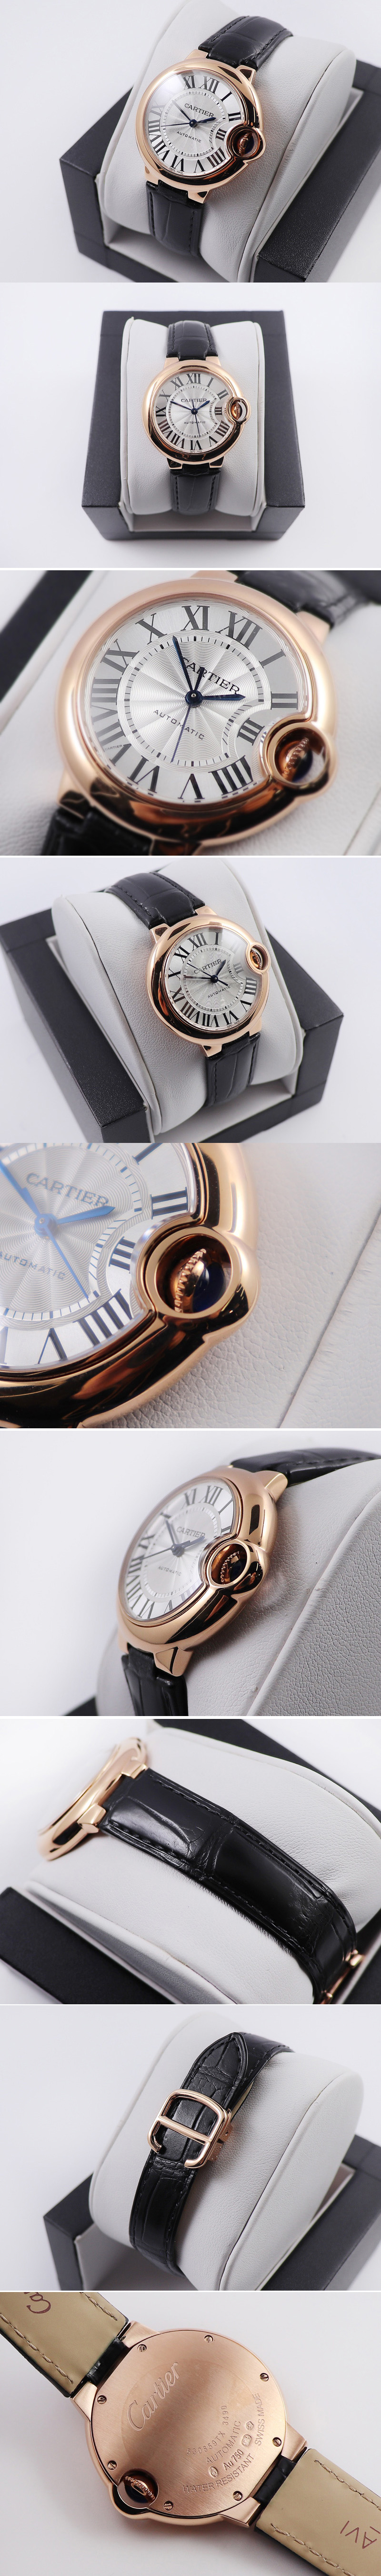 Replica Cartier Ballon Bleu 33mm RG AF 1:1 Best Edition White Textured Dial on Black Croco Leather Strap Cal.076